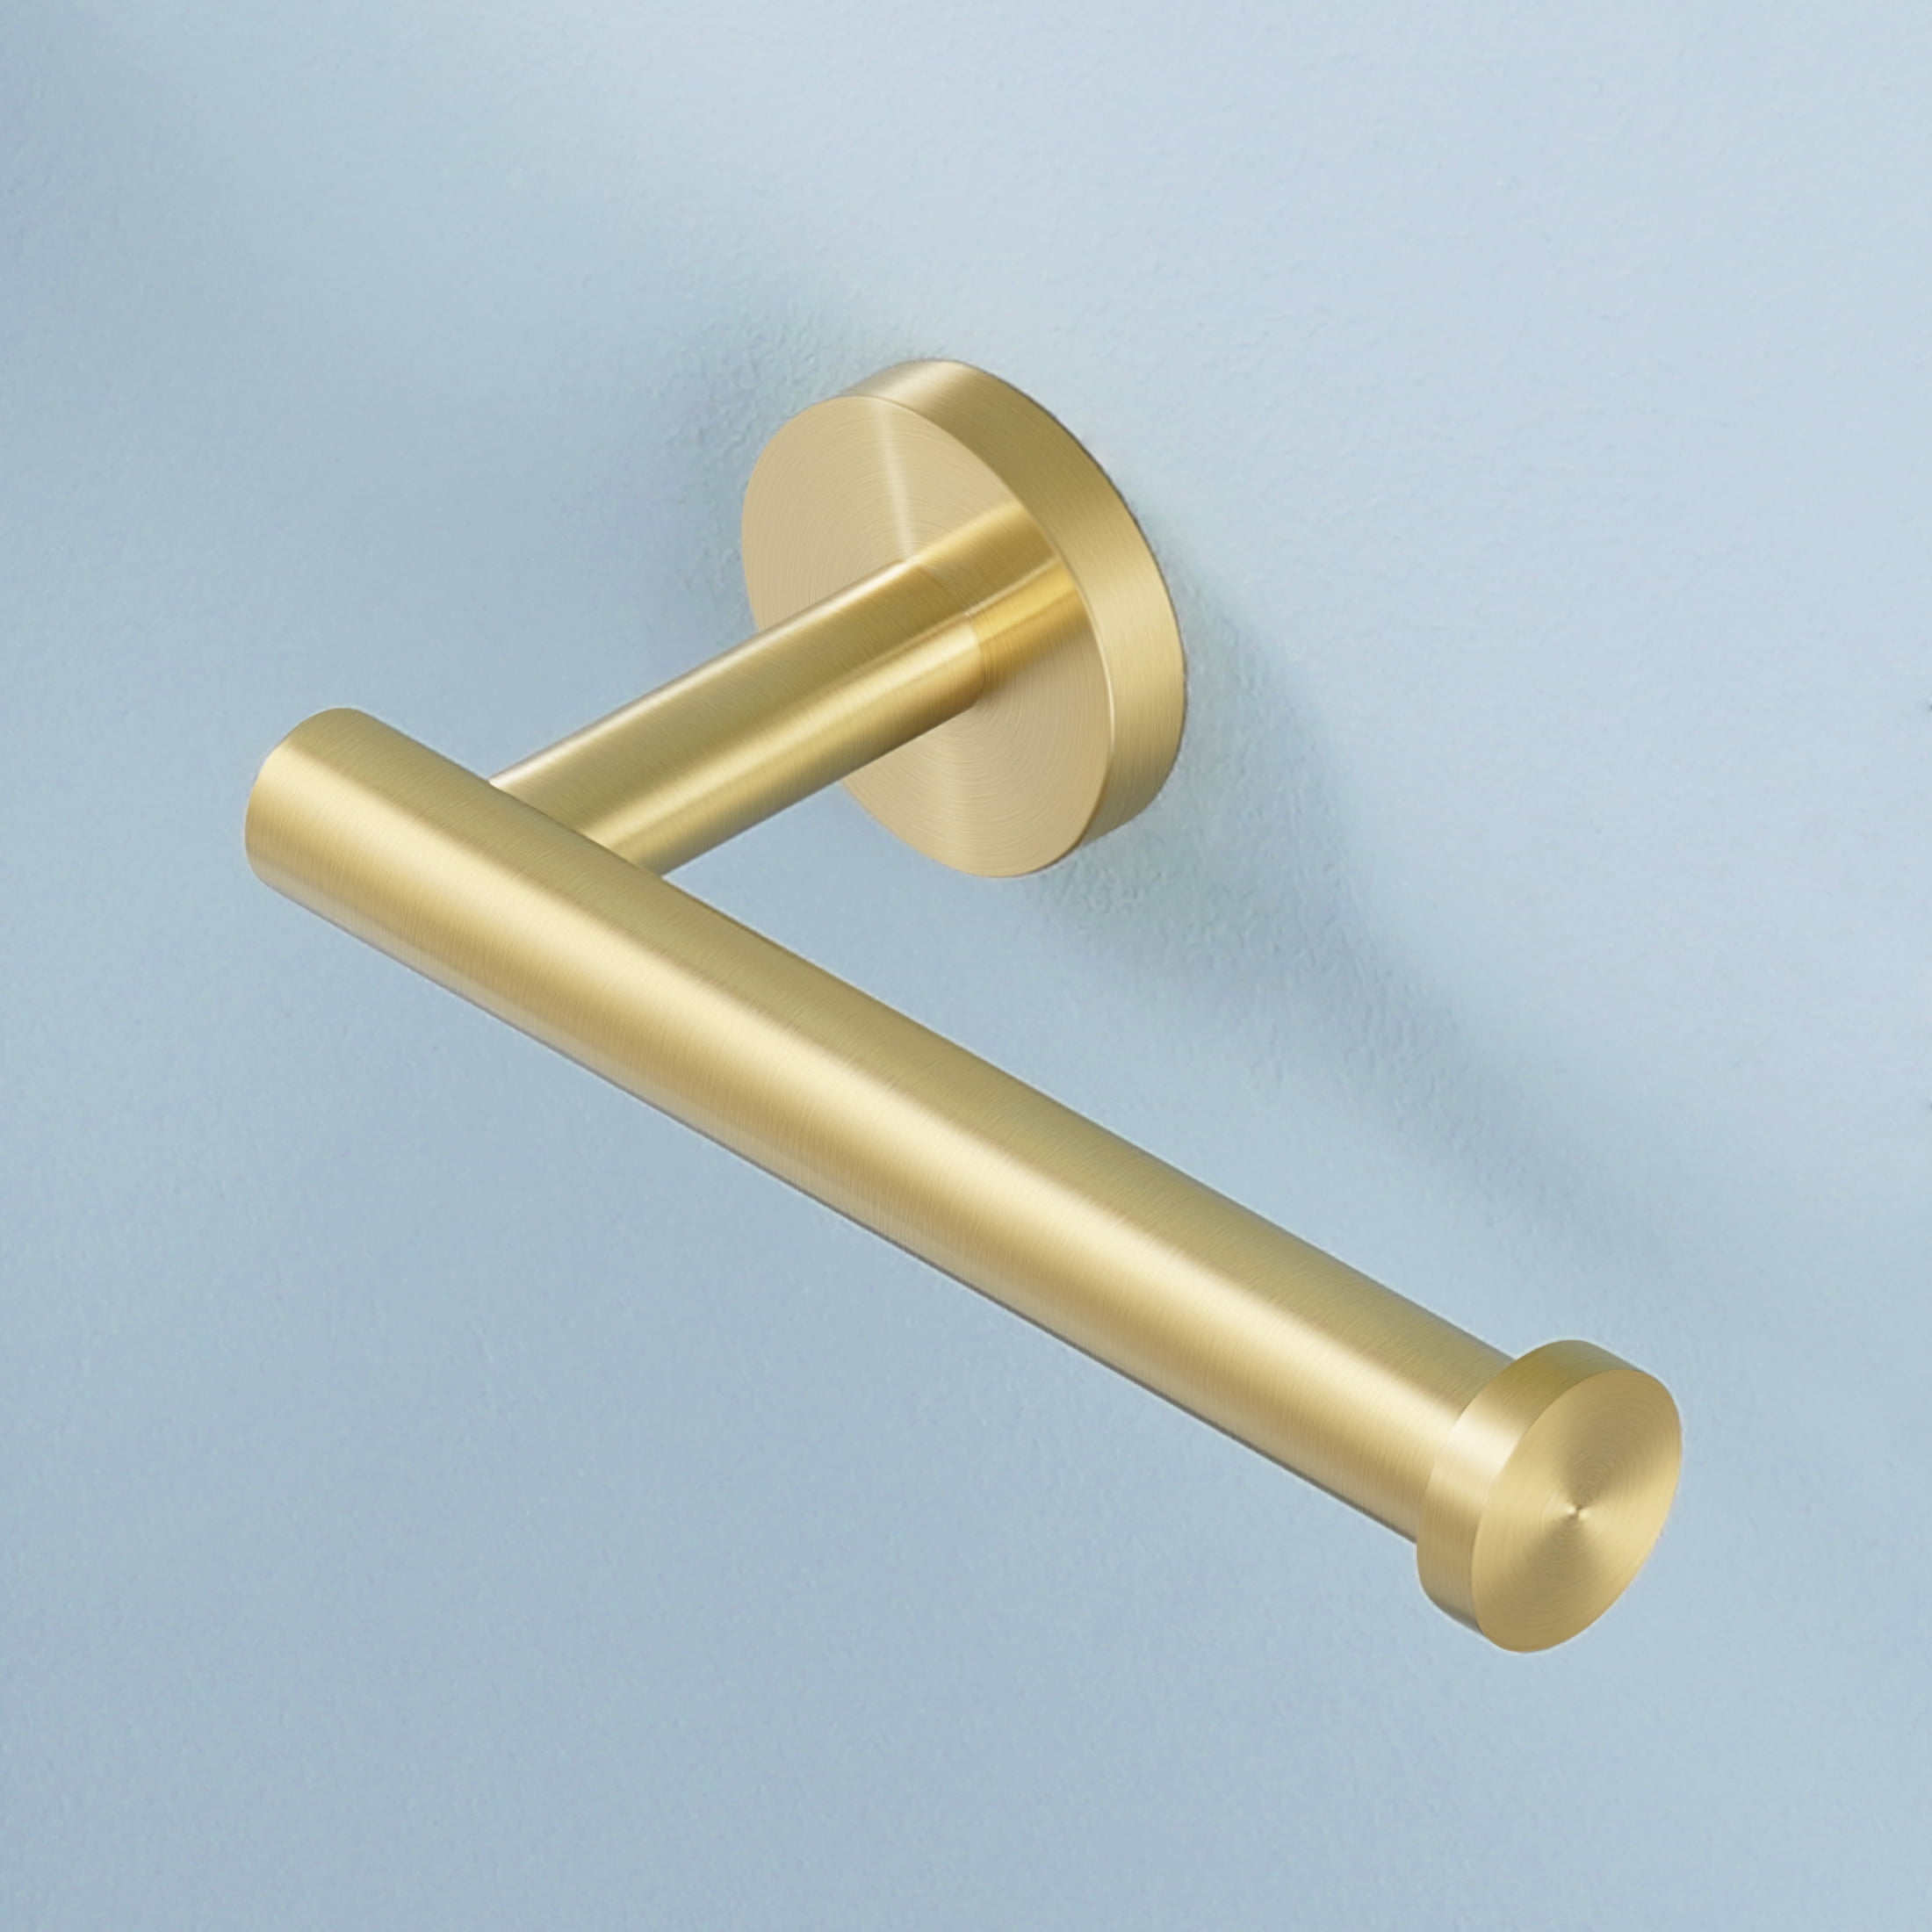 Brushed Gold Toilet Paper Holder Wall Mounted Aluminum Paper Roll